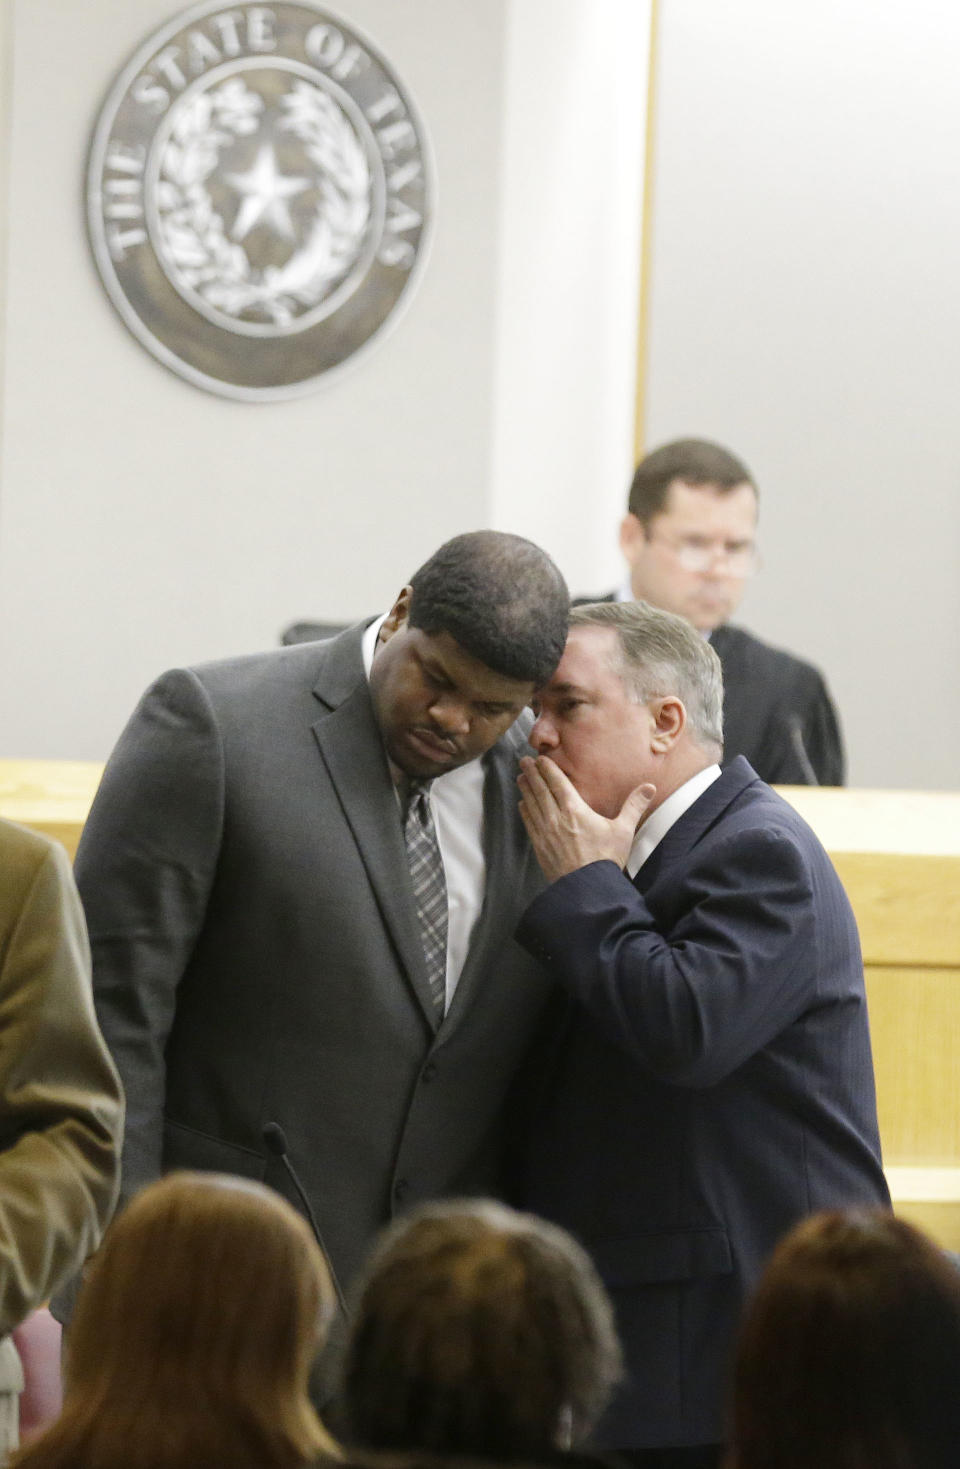 Former Dallas Cowboys' Josh Brent, left, listens to his attorney George Milner during juror selection Friday, Jan. 10, 2014, in Dallas. Jury selection continues for the upcoming trial of Brent, who's accused of killing a practice squad player in a drunken-driving wreck. Opening statements in the case are expected next week. (AP Photo/LM Otero)